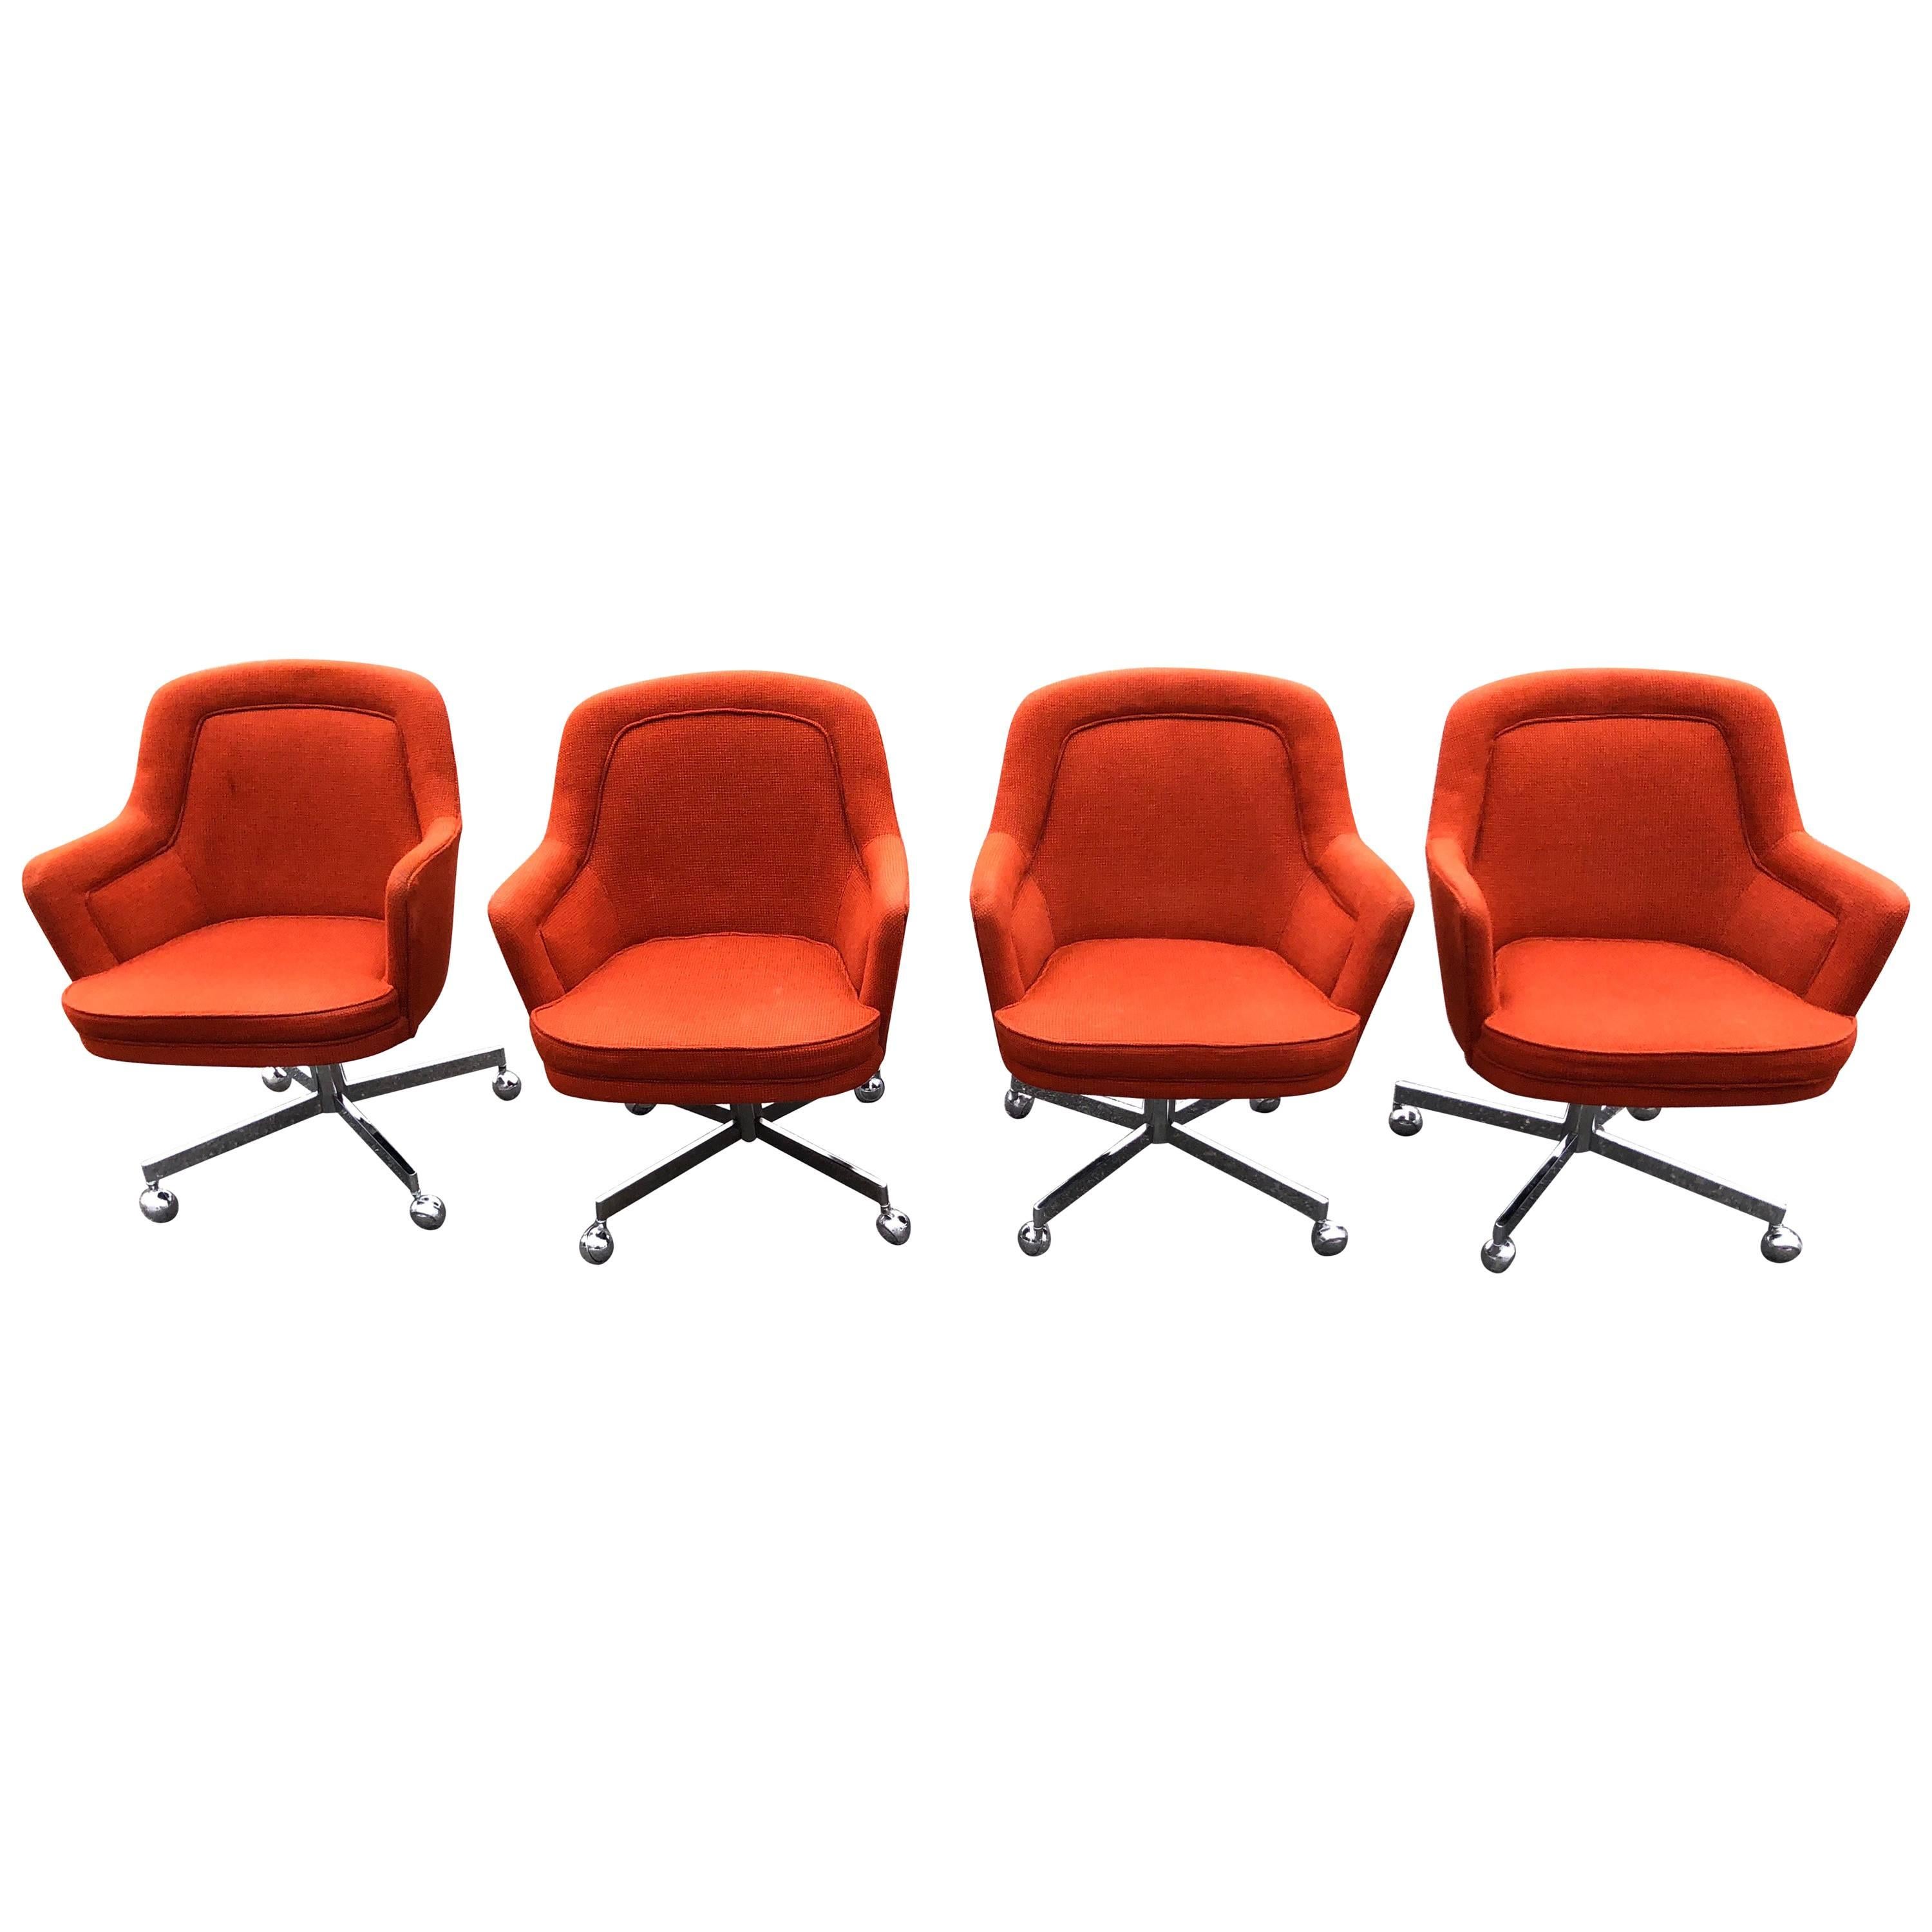 Set of Four Chairs, in the style of Max Pearson for Knoll